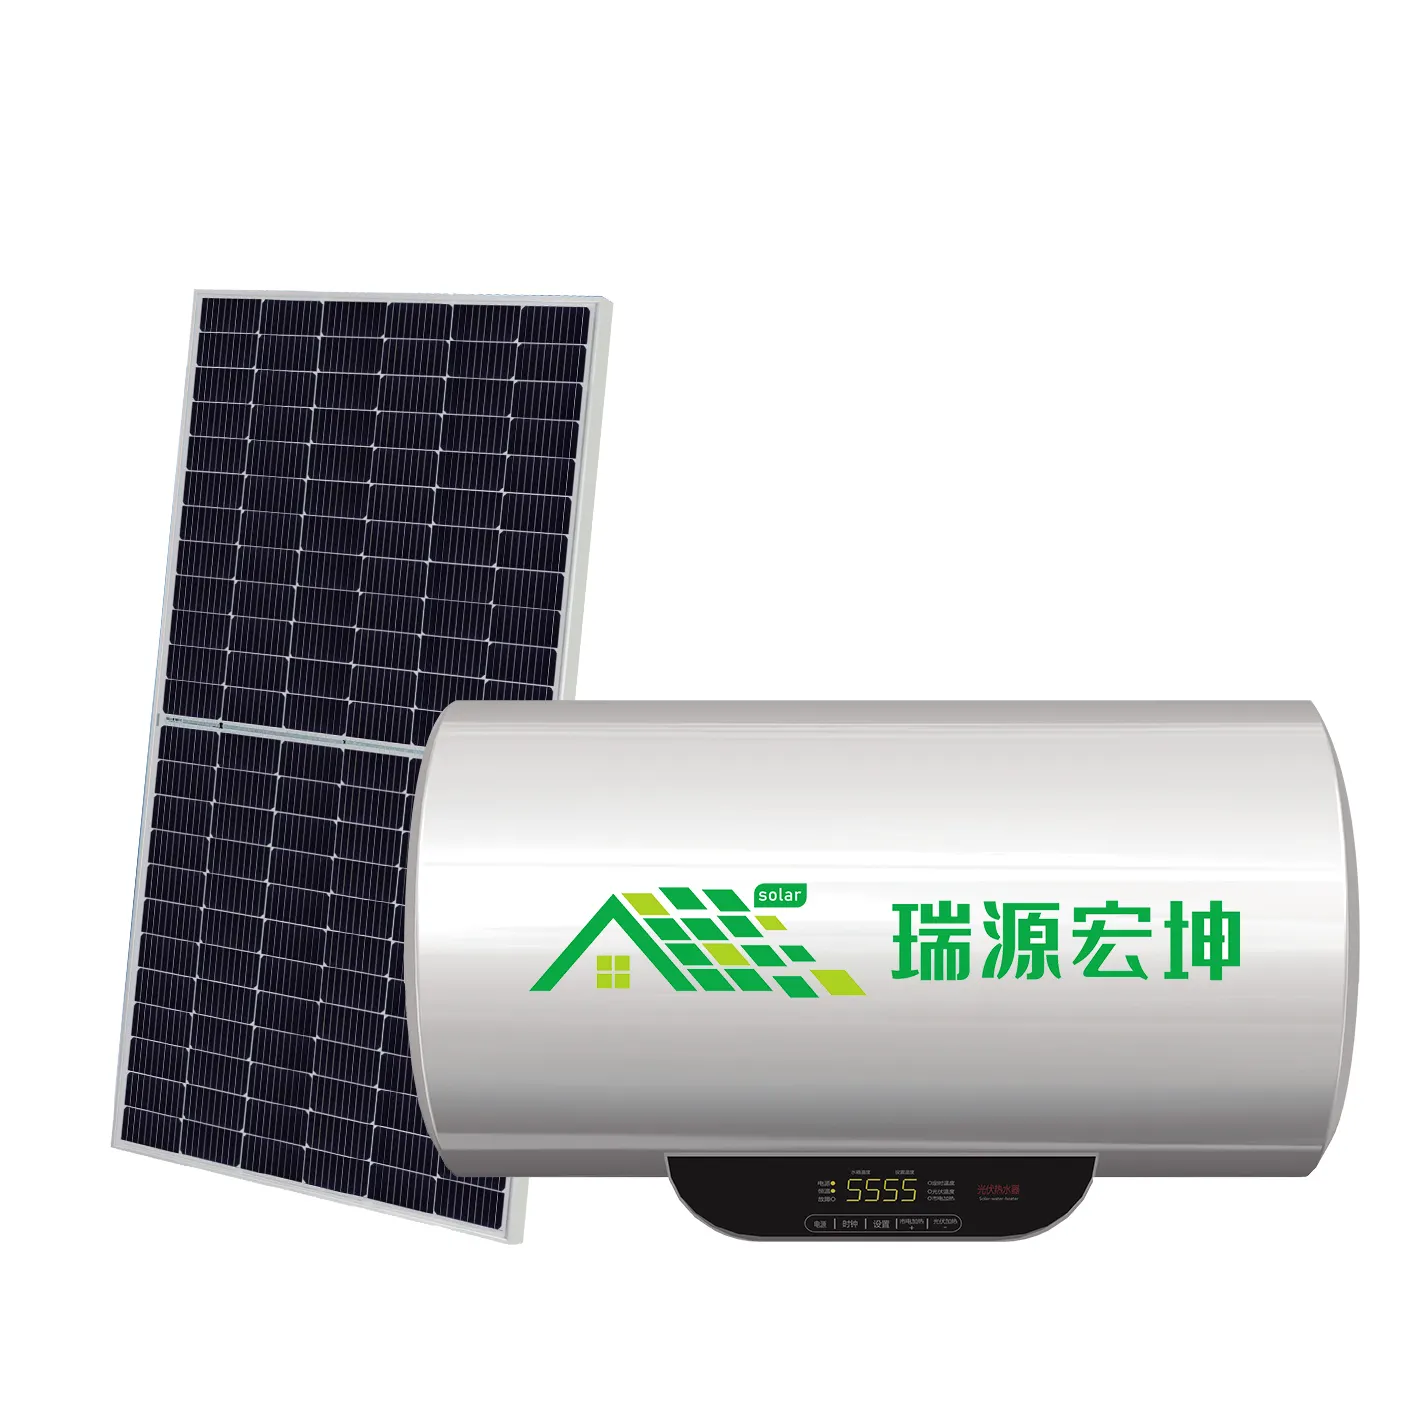 Solar Water Heaters for Home Hot Water Use with Big Enamel Water Tank 60L